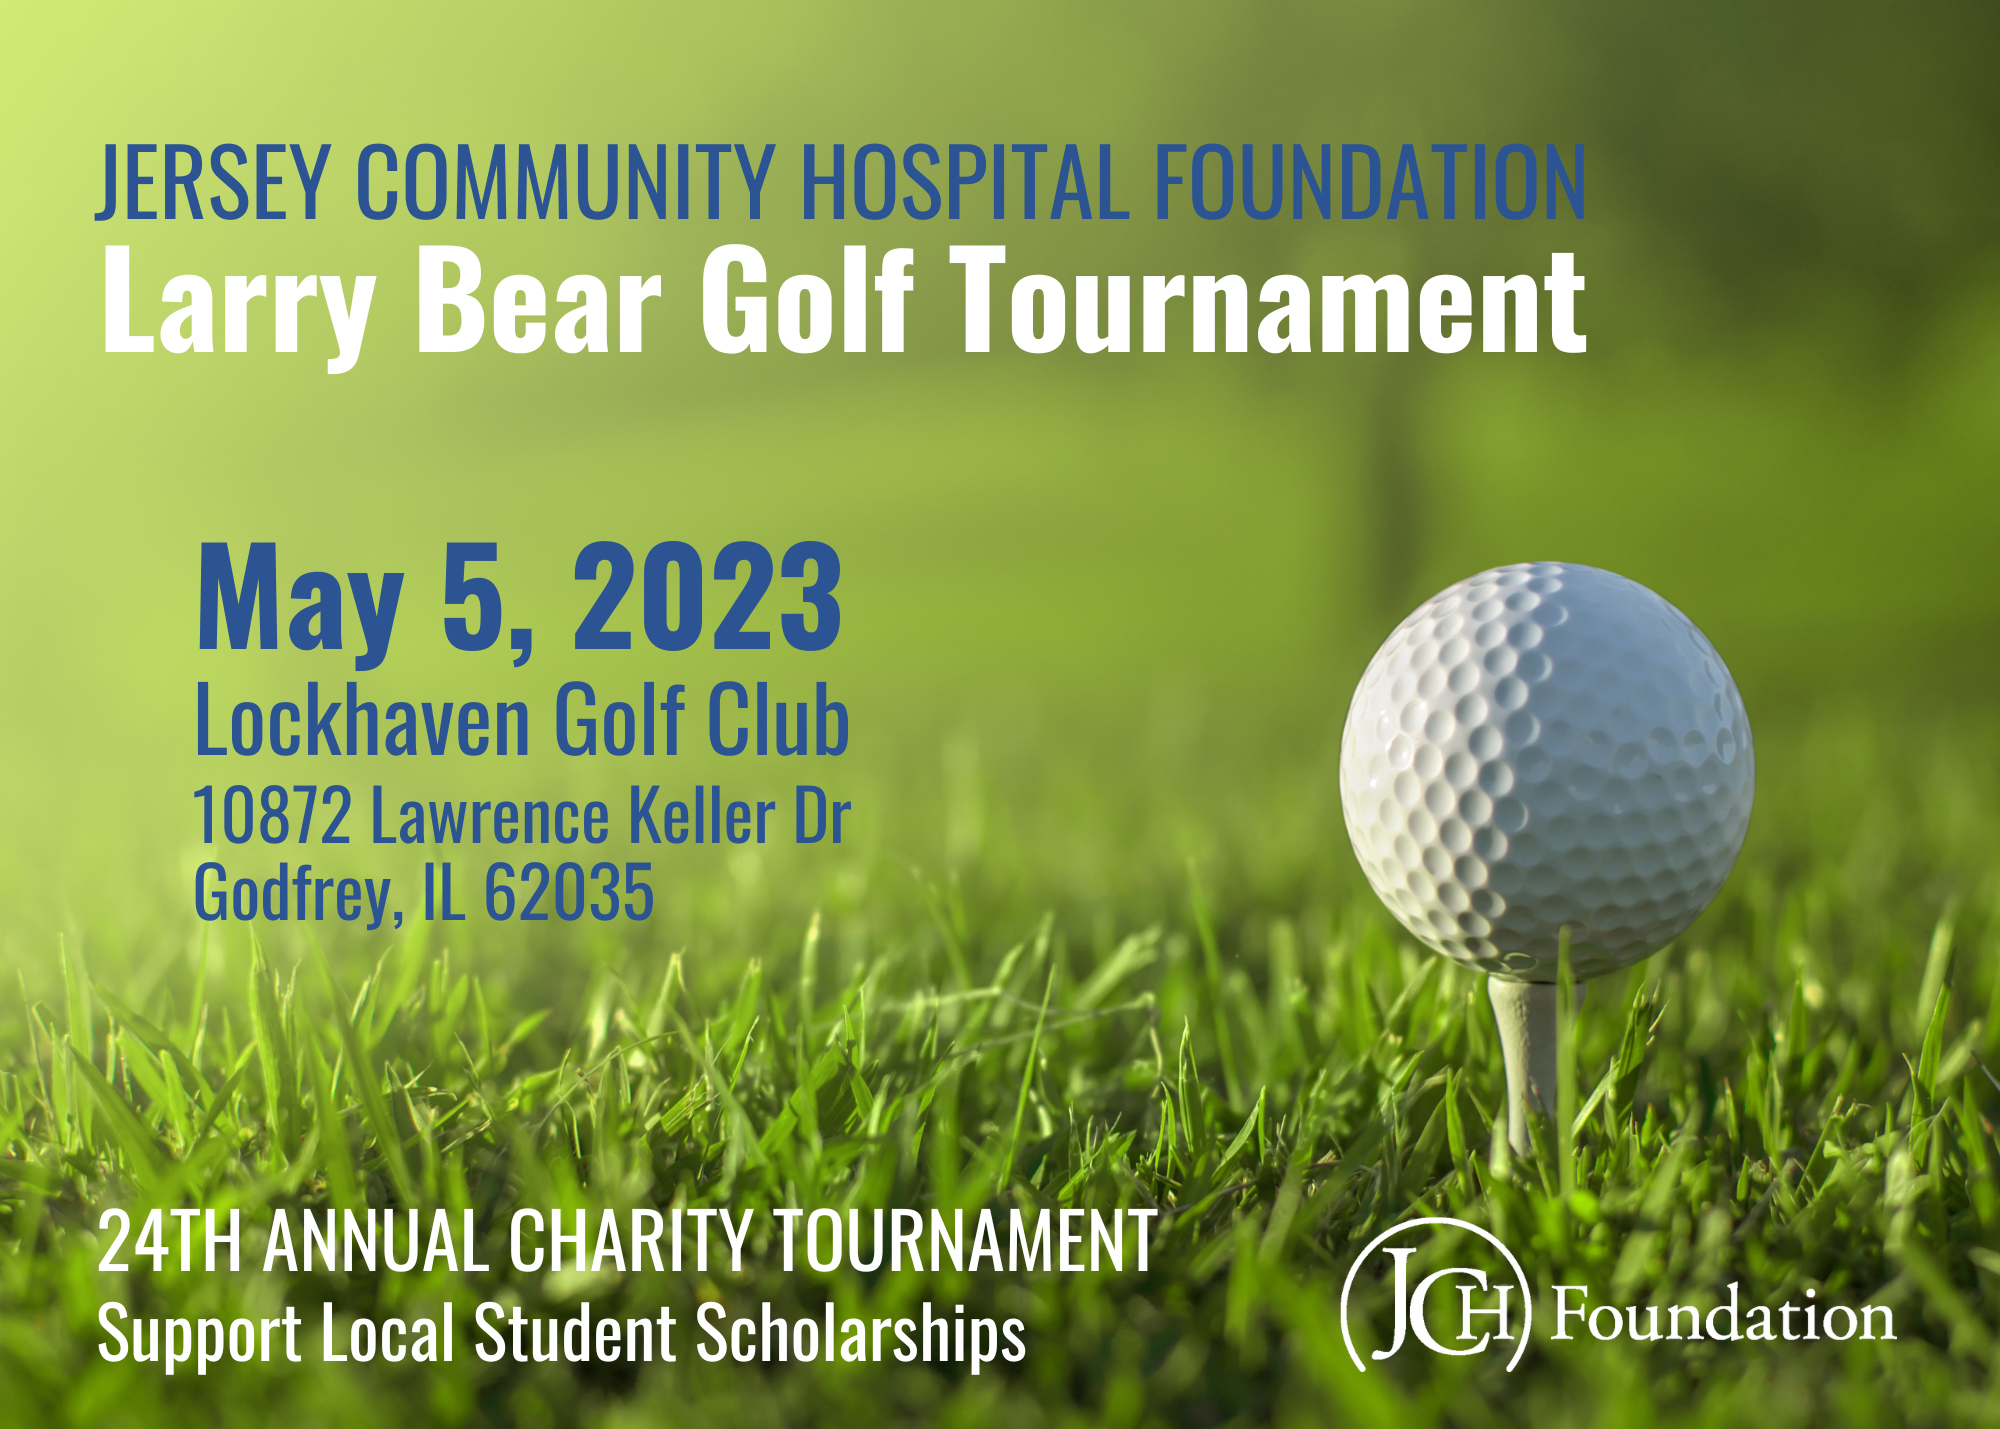 flyer for the larry bear golf tournament happening on May 5, 2023